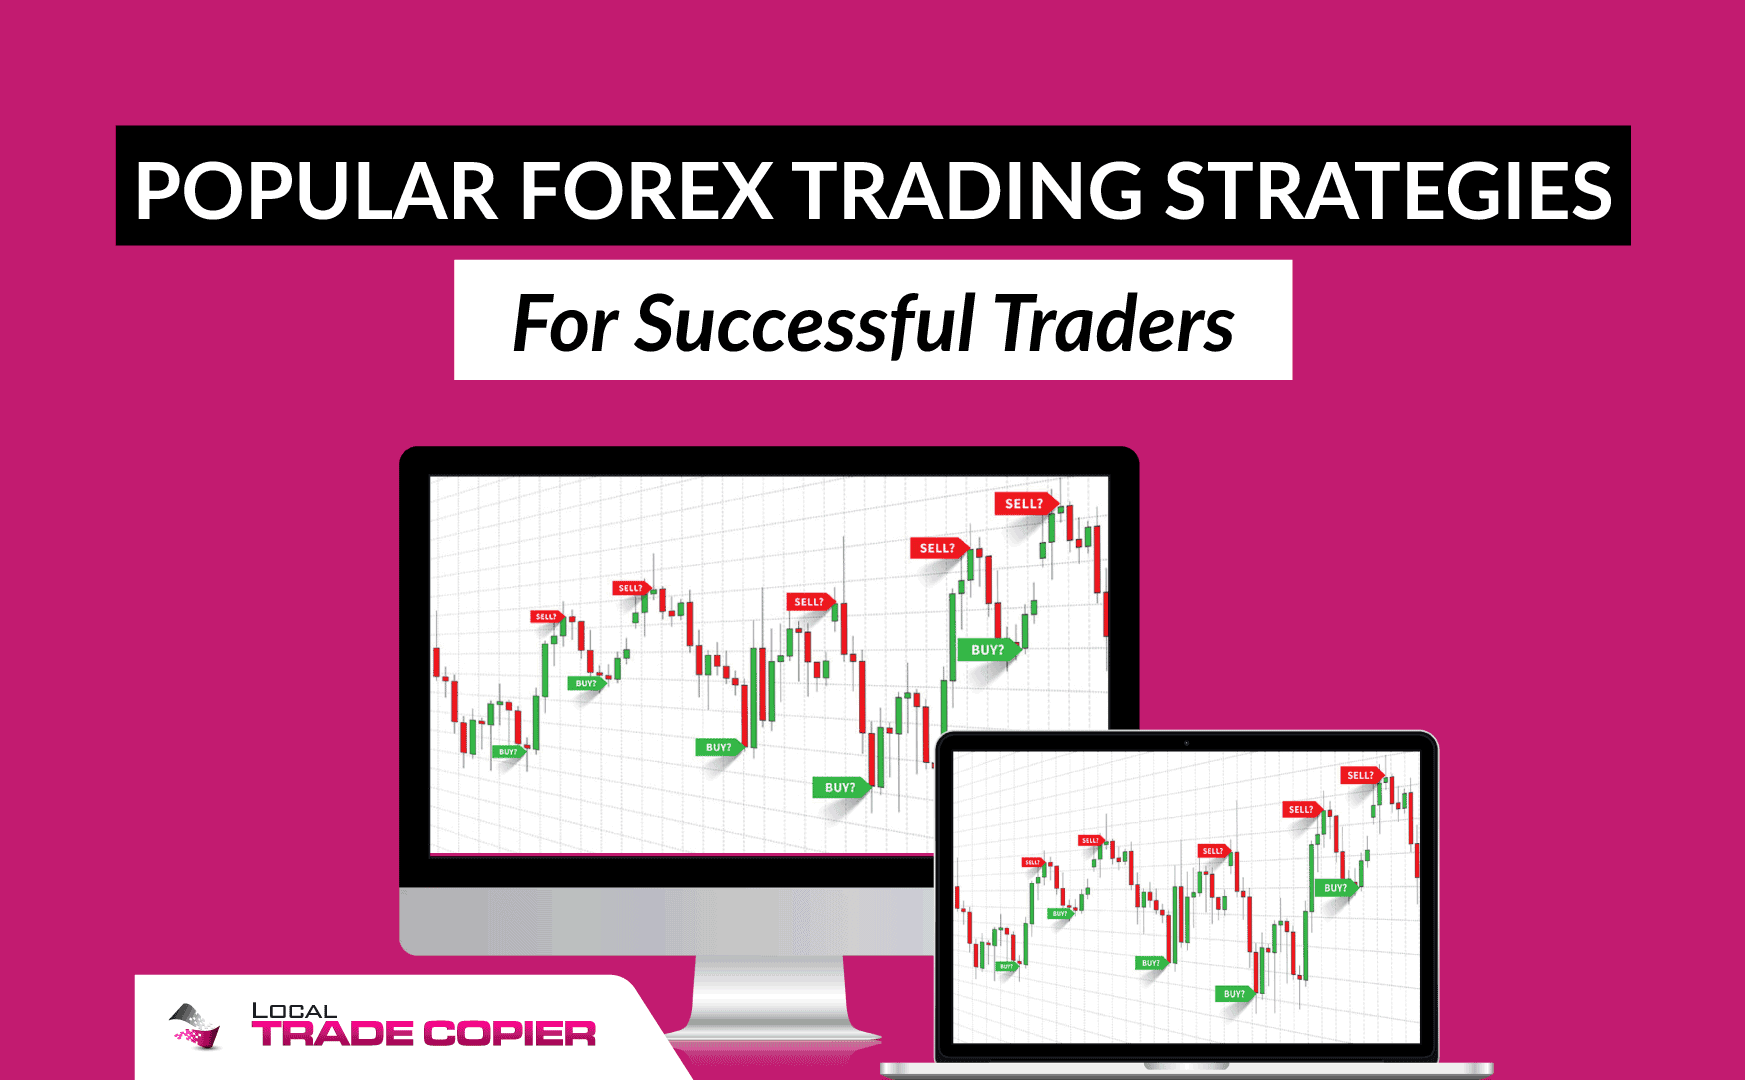 Popular Forex Trading Strategies For Successful Traders